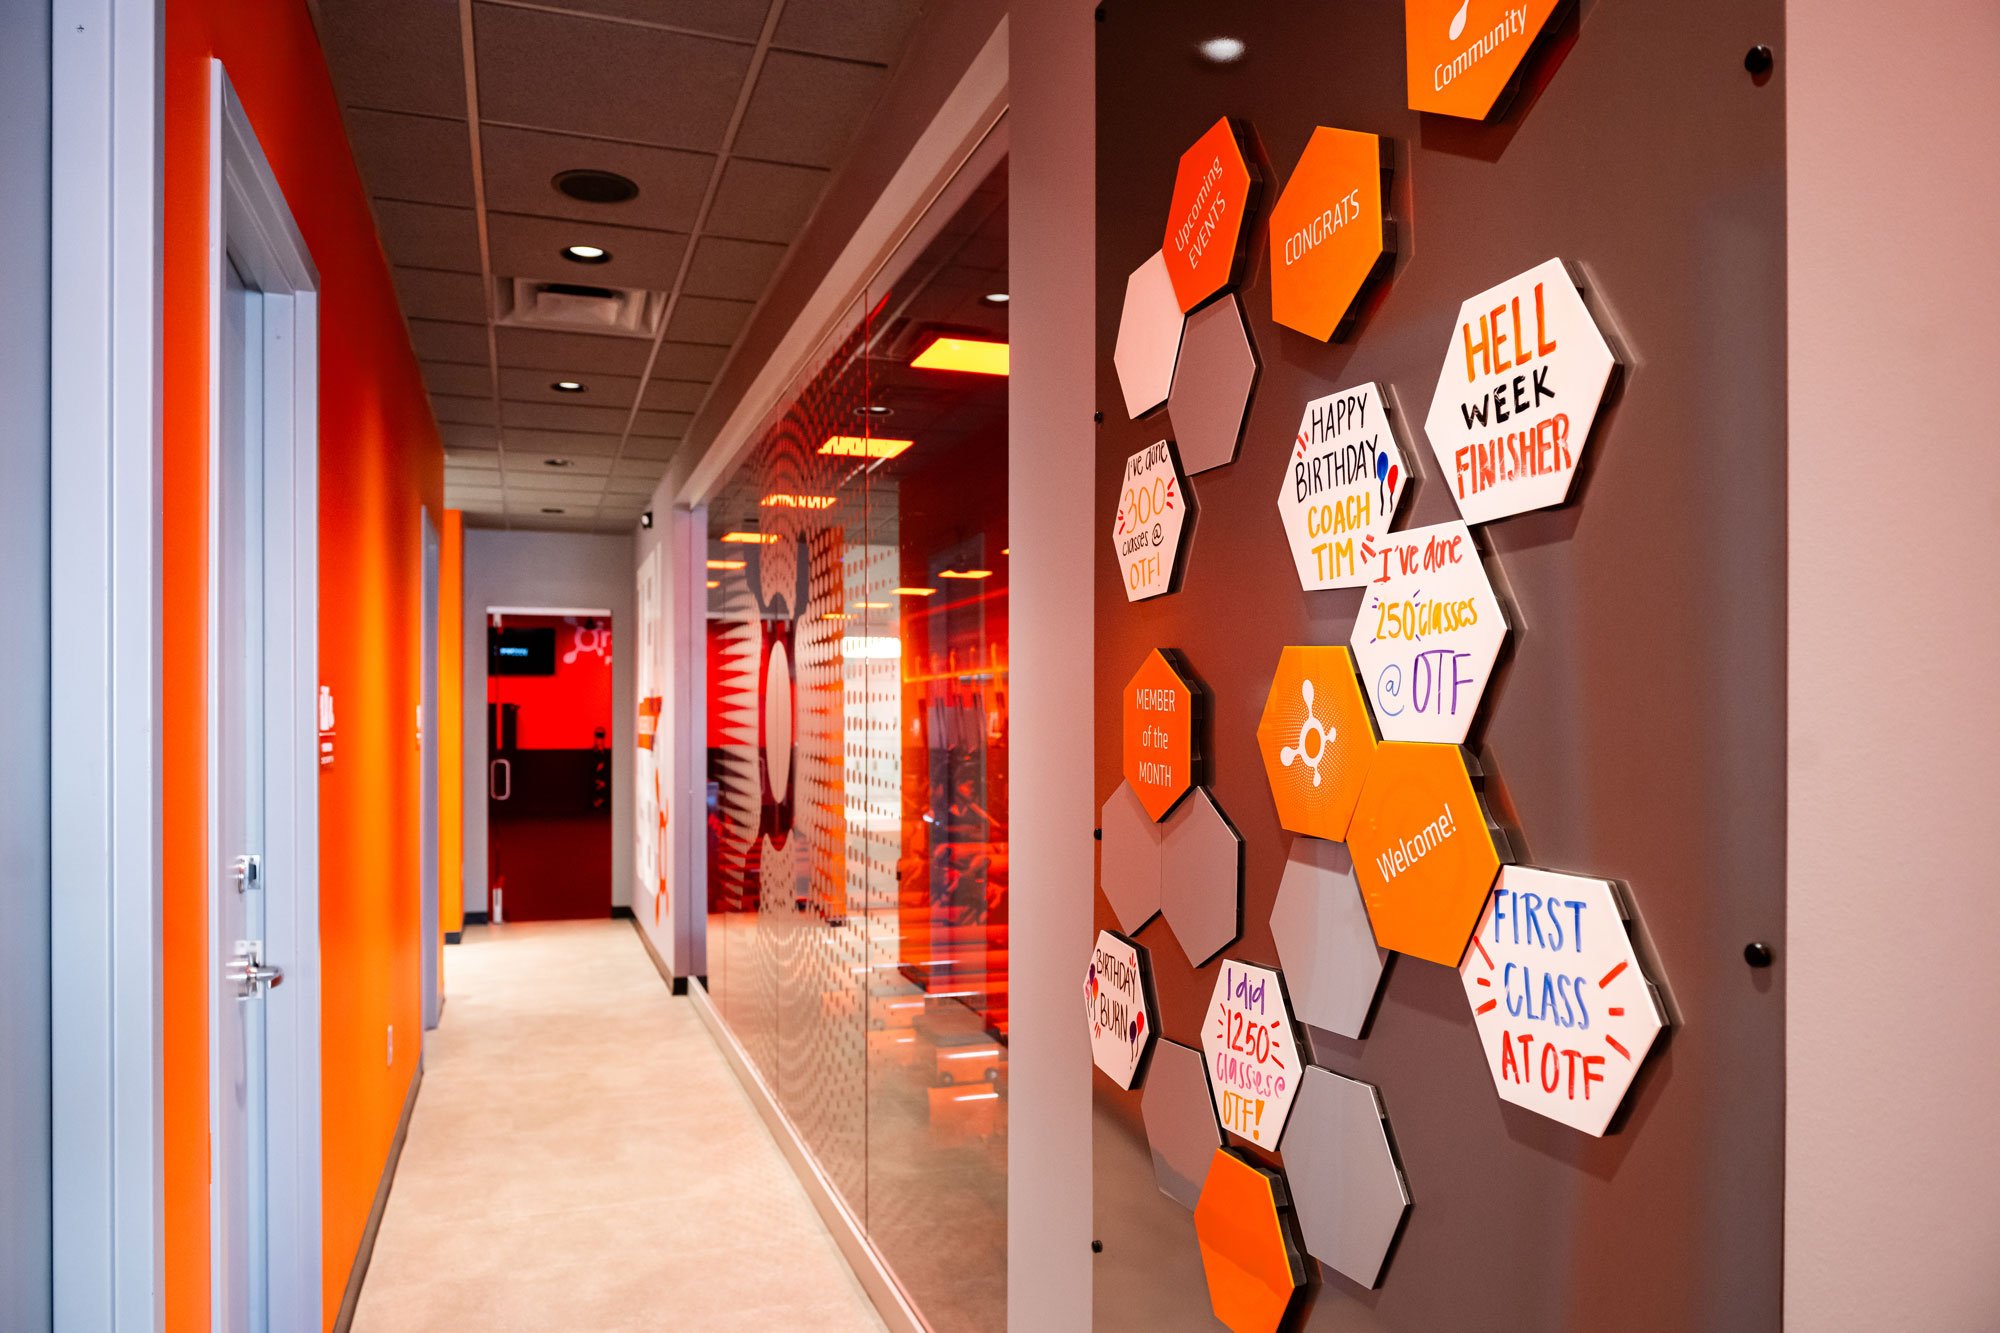 RCC-orange-theory-fitness-knoxville-tennessee-hallway.jpg